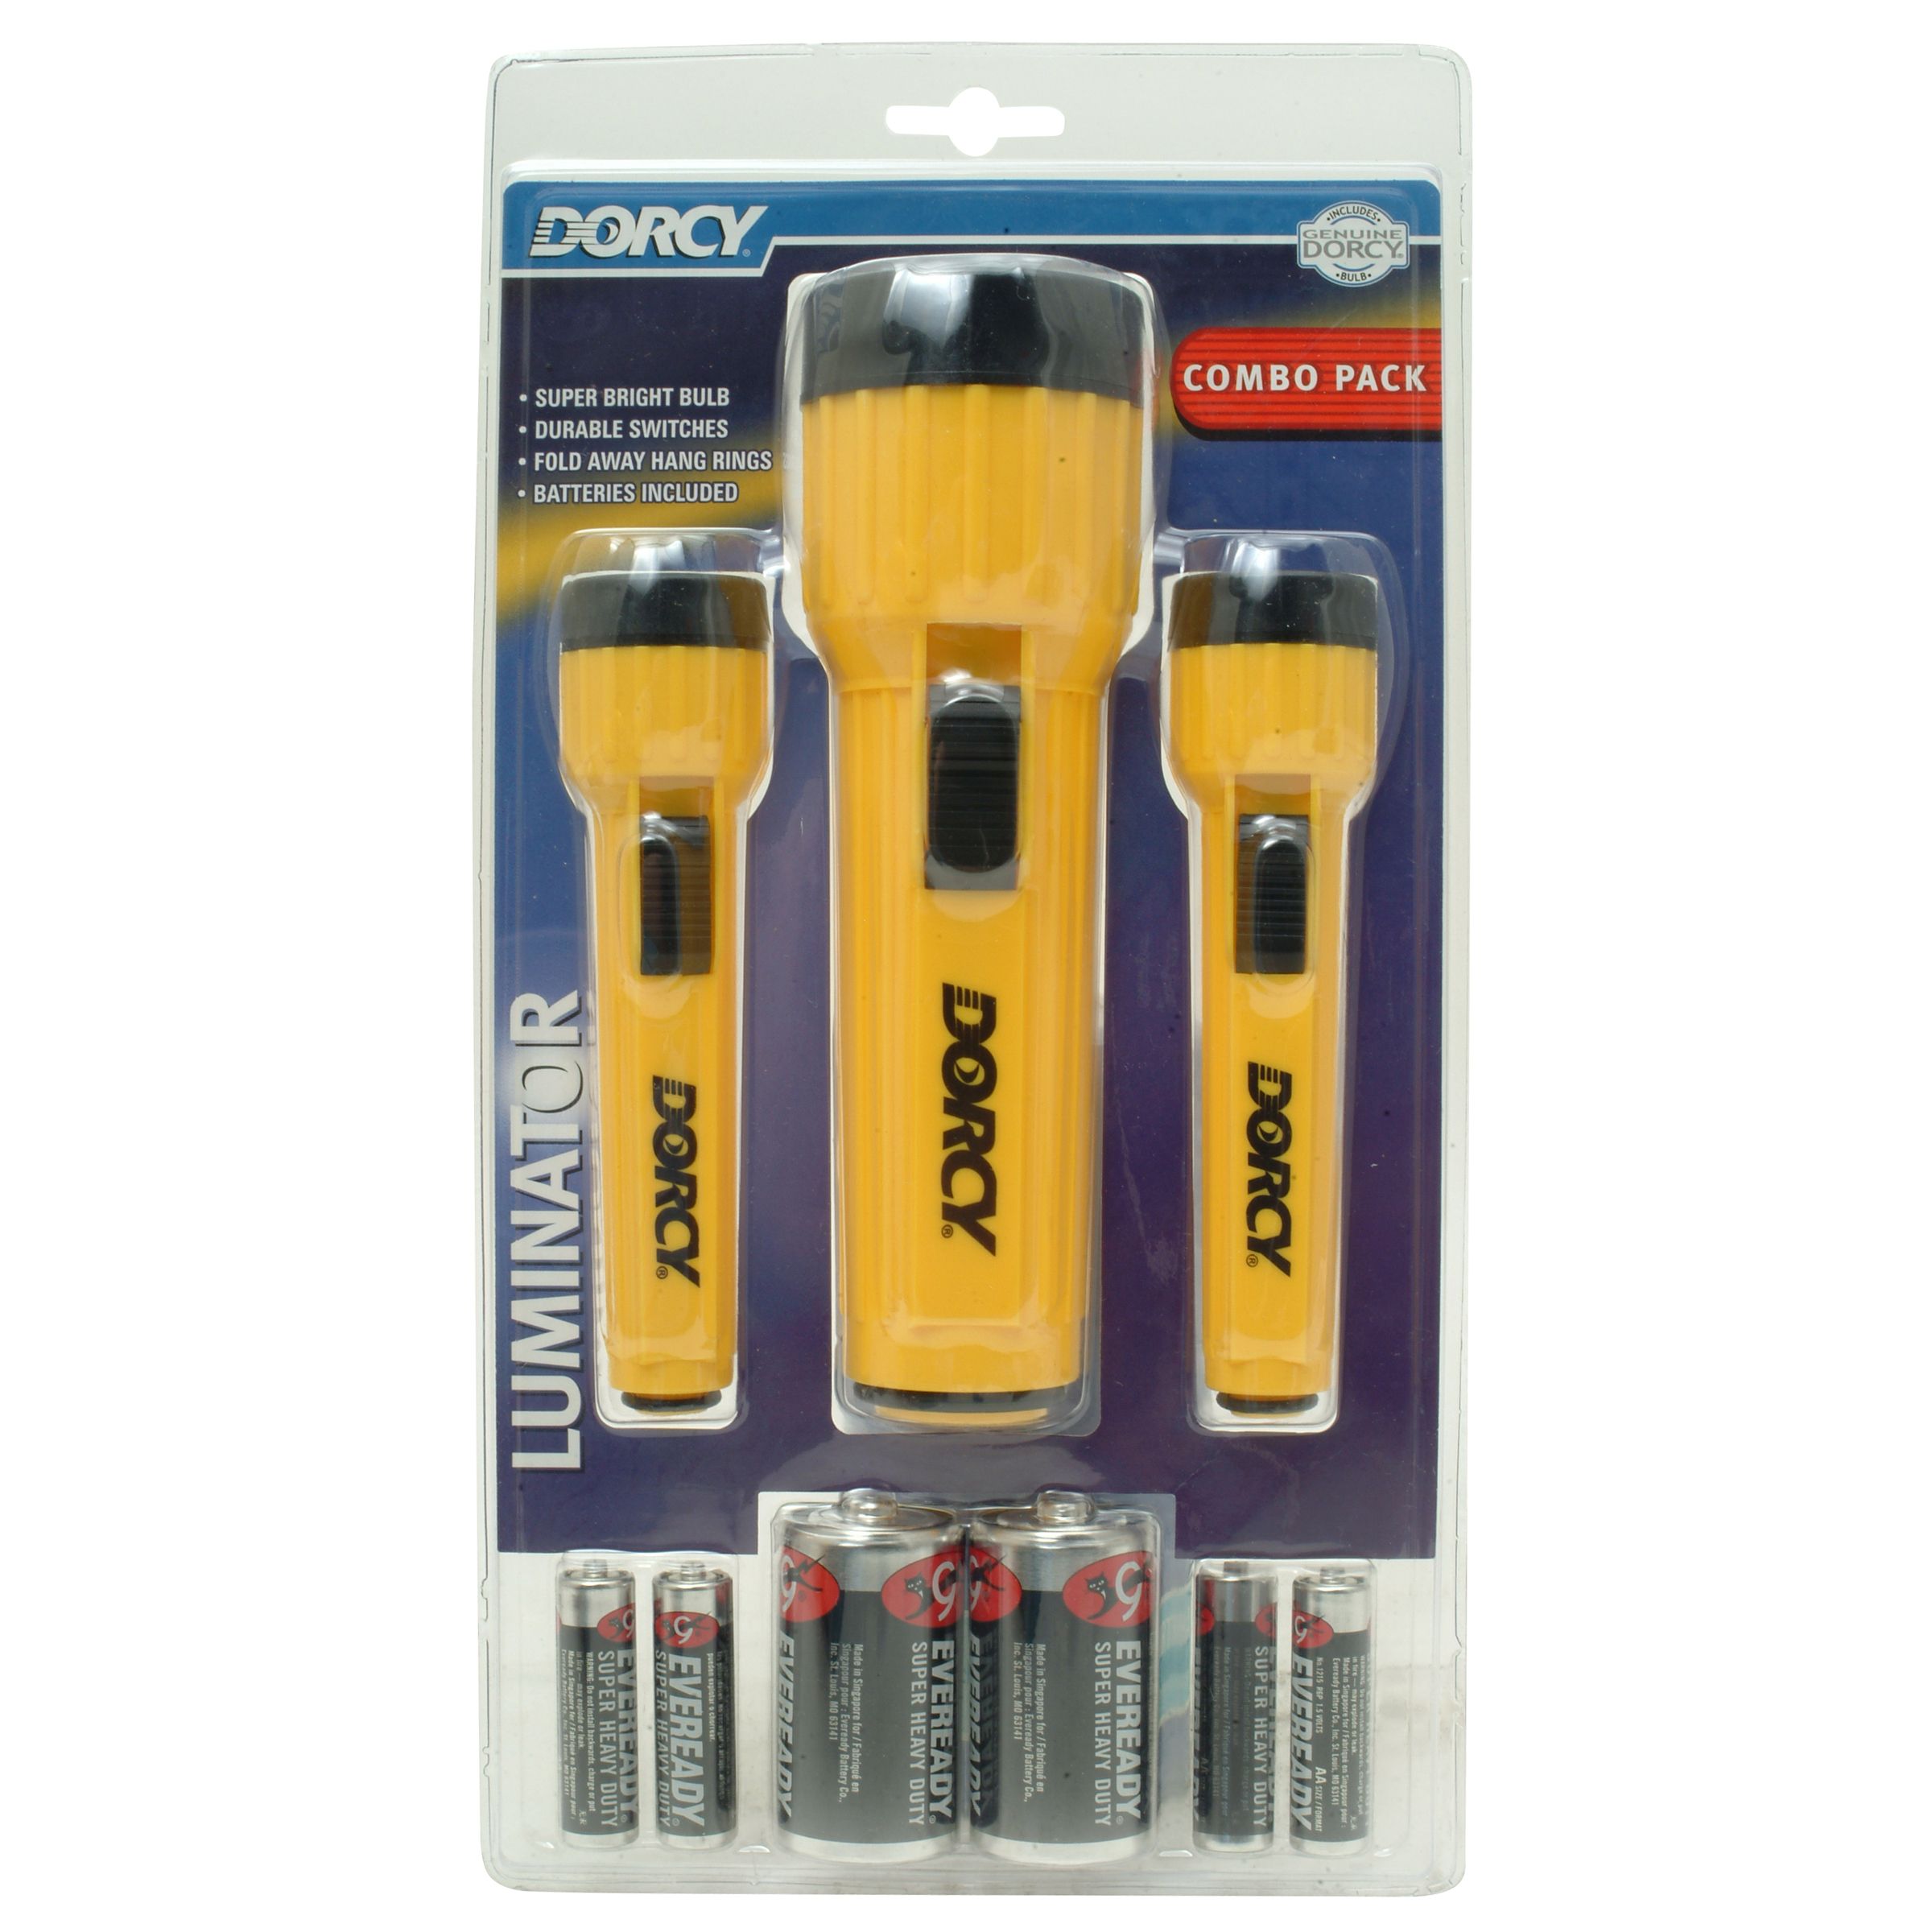 Dorcy International Flashlight 3 pack Combo with Batteries